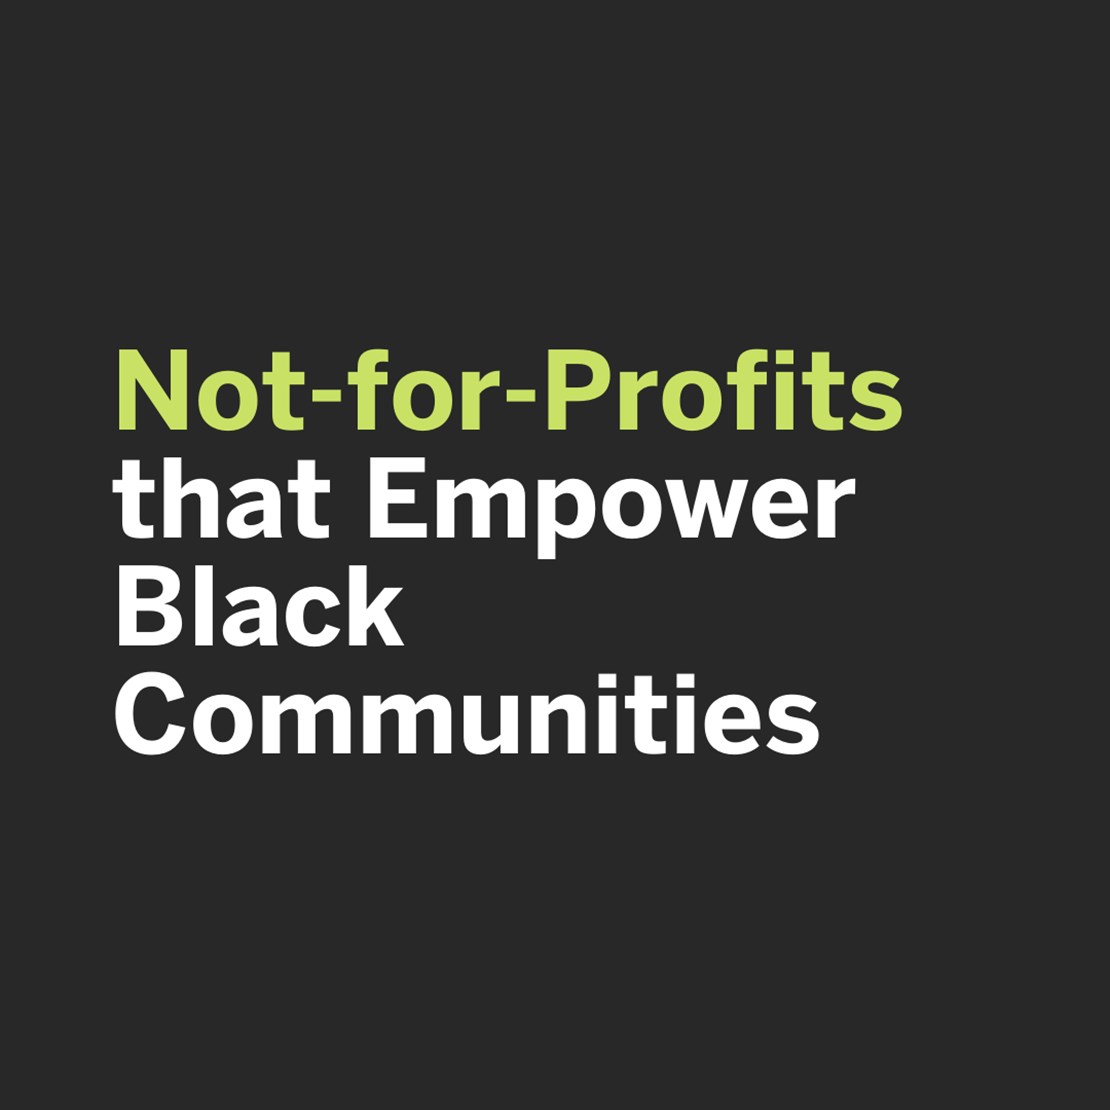 Not-for-Profits that Empower Black Communities